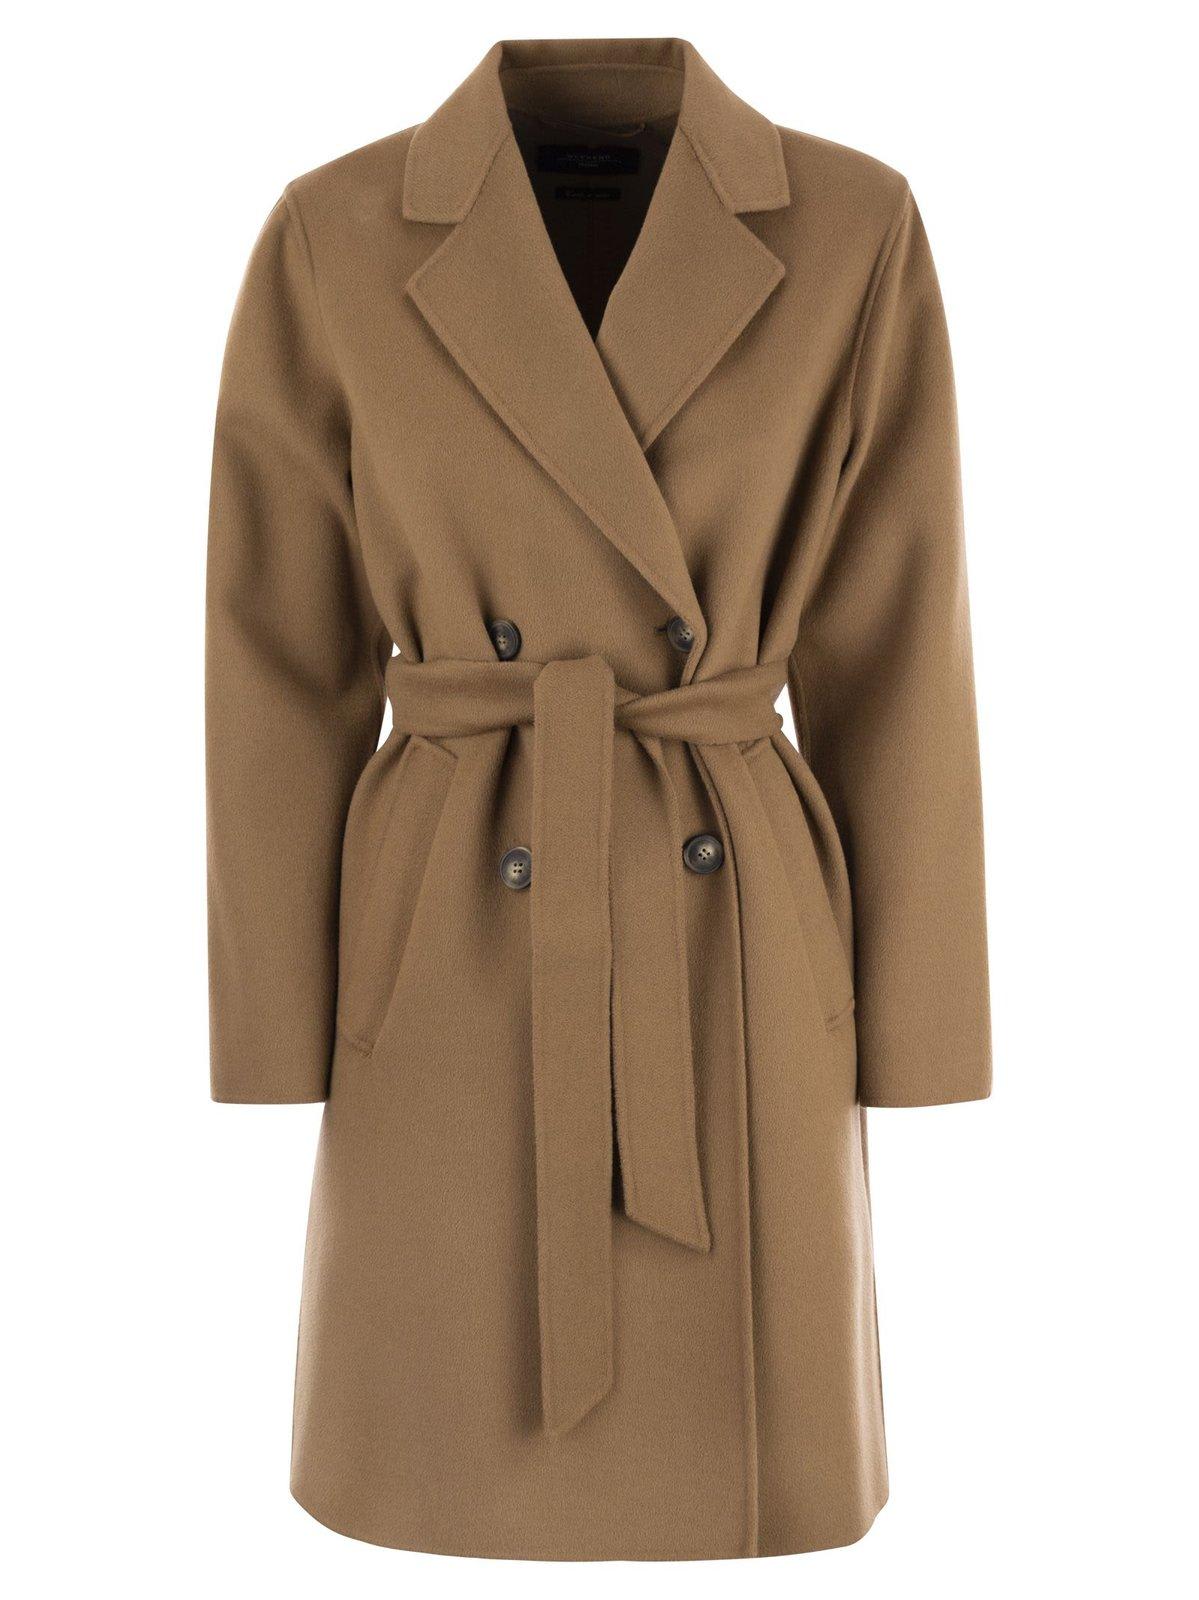 WEEKEND MAX MARA DOUBLE-BREASTED BELTED COAT